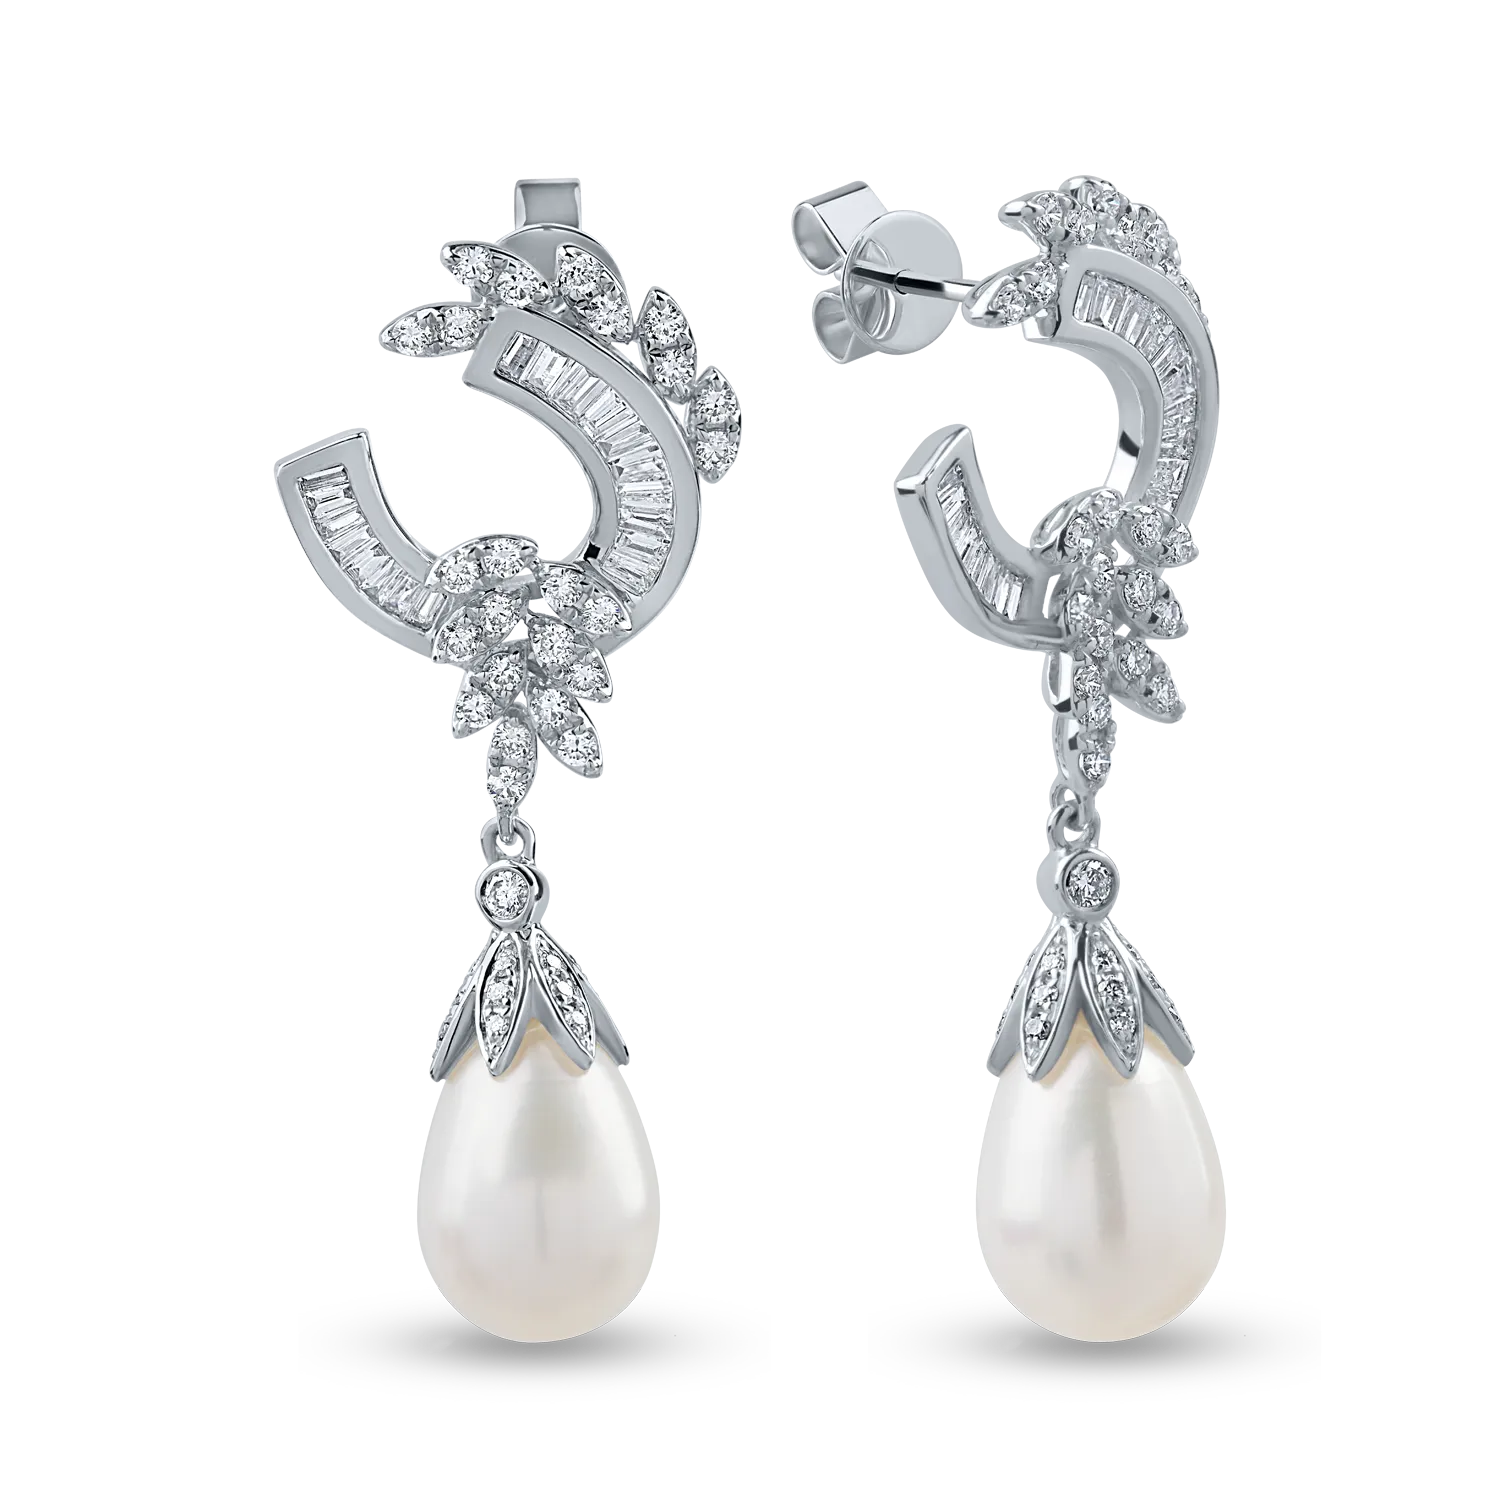 White gold earrings with 7.53ct fresh water pearls and 0.84ct diamonds